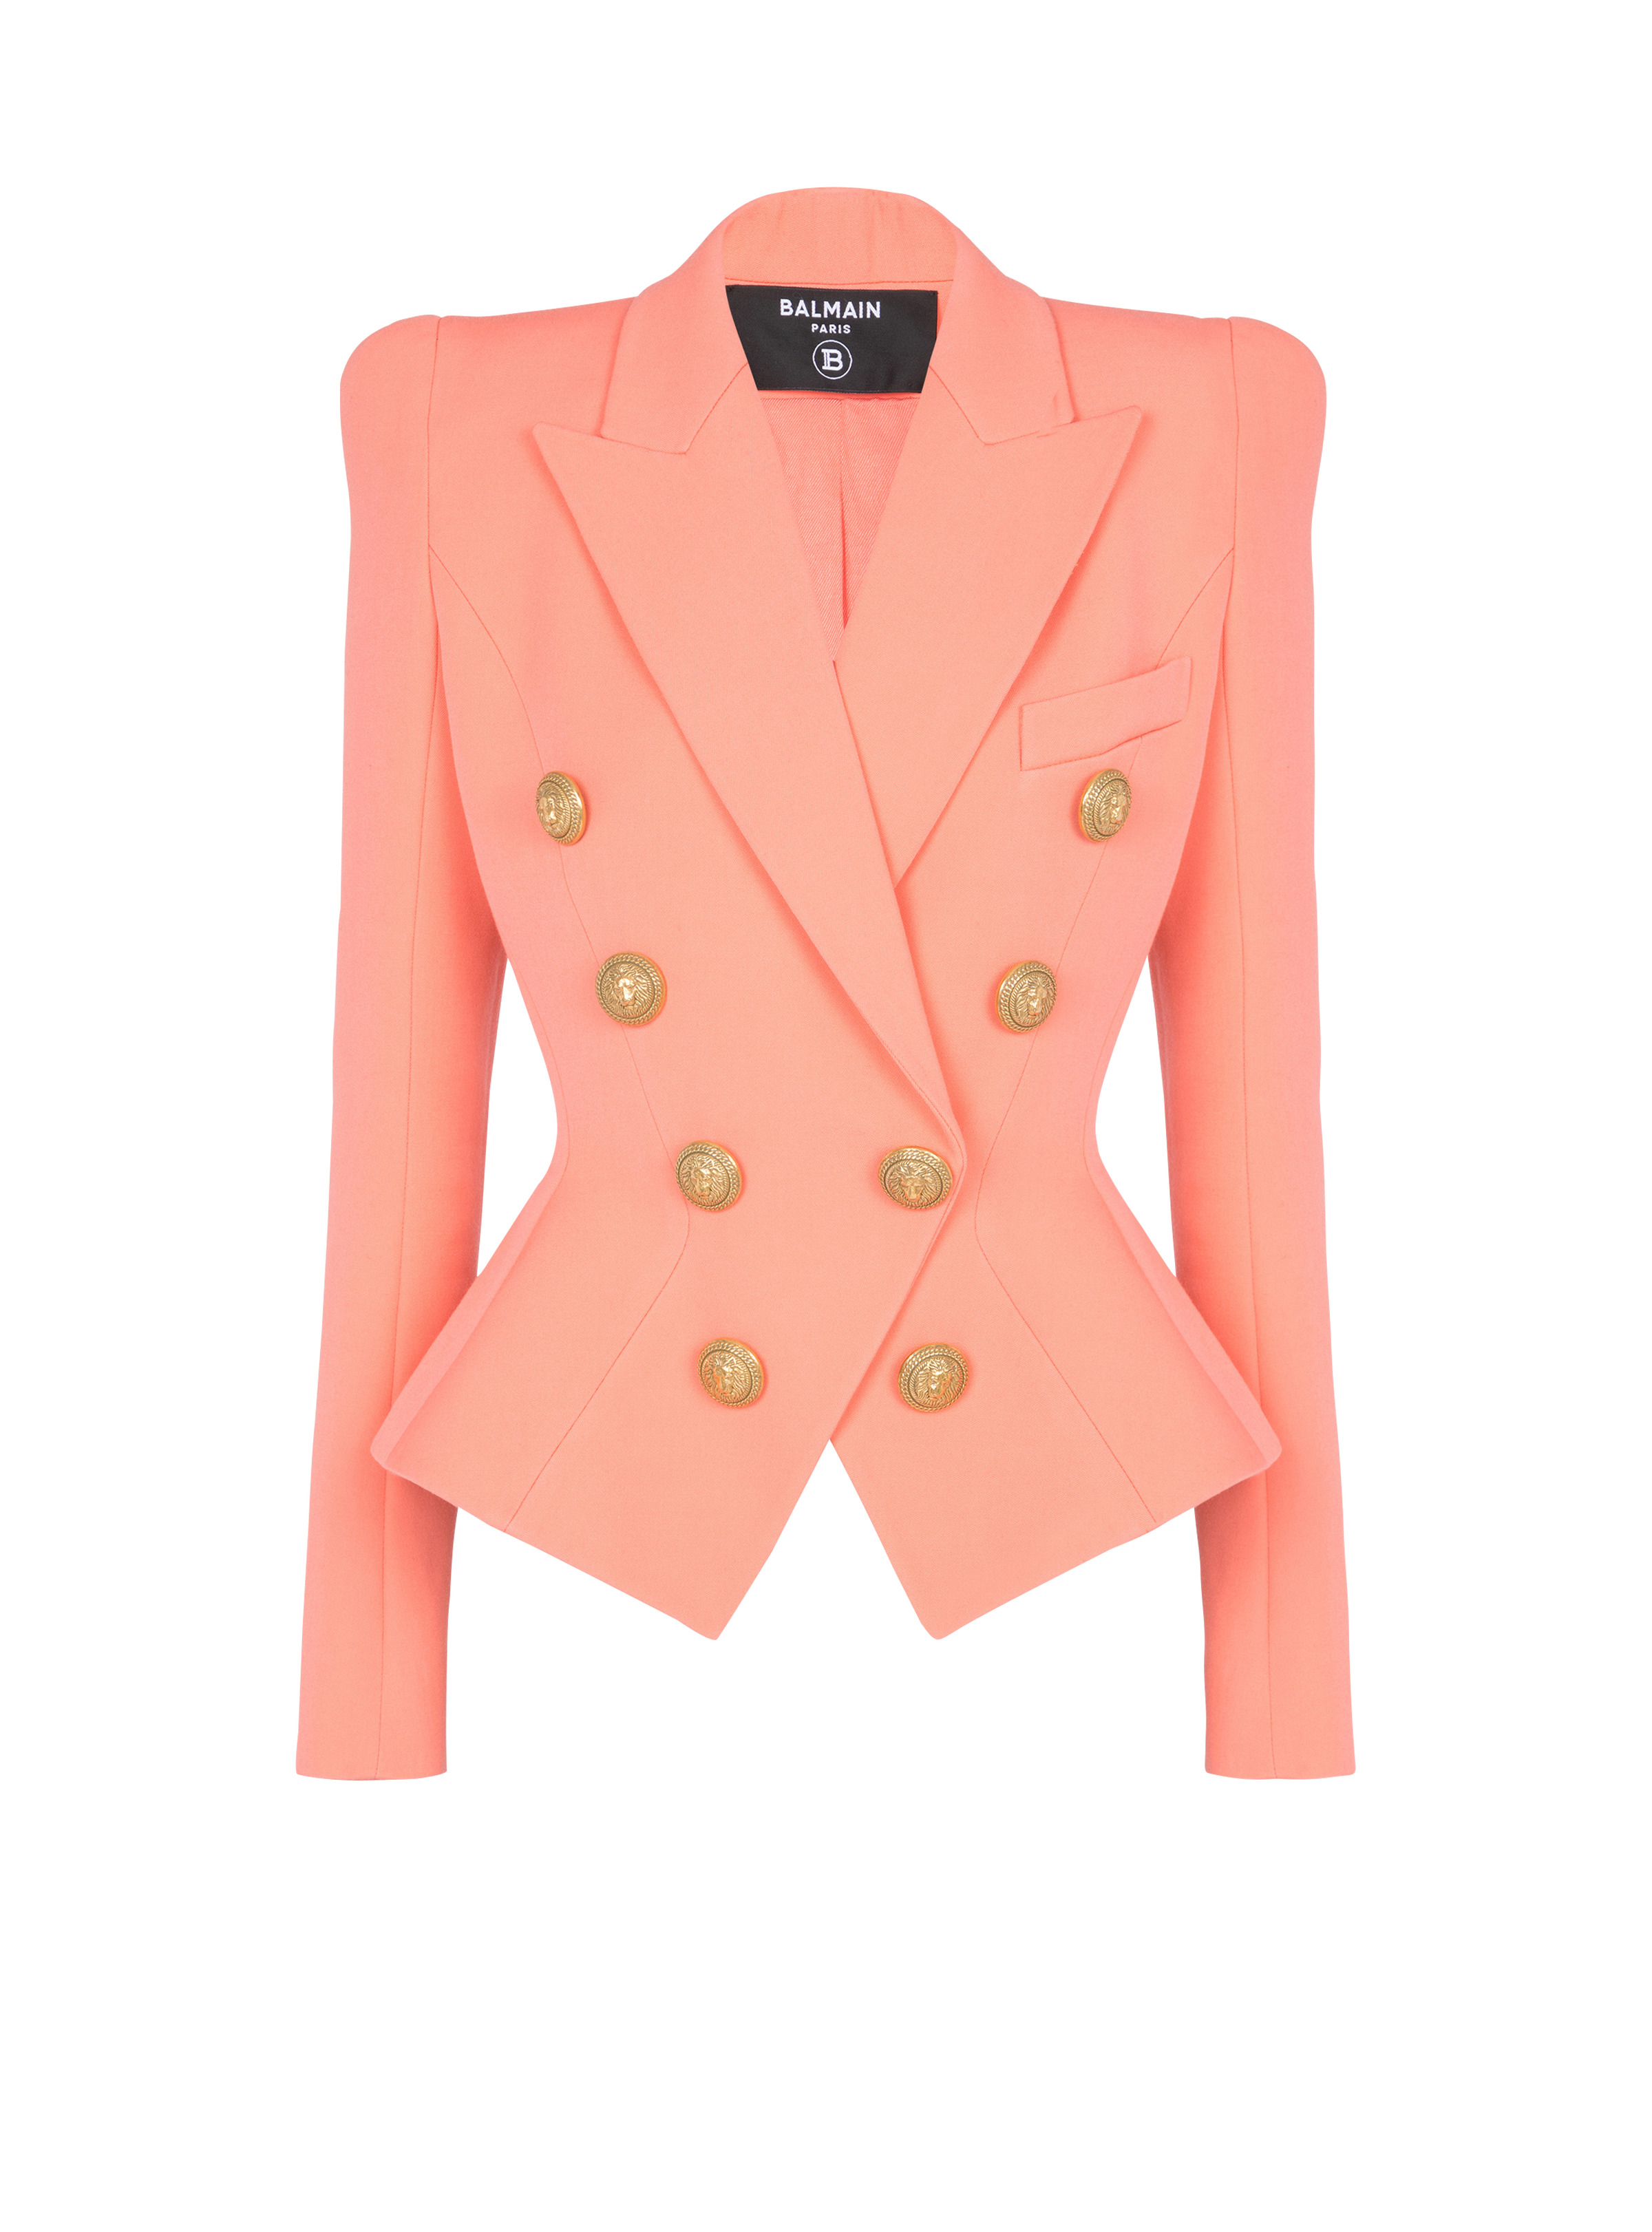 Cinched buttoned jacket